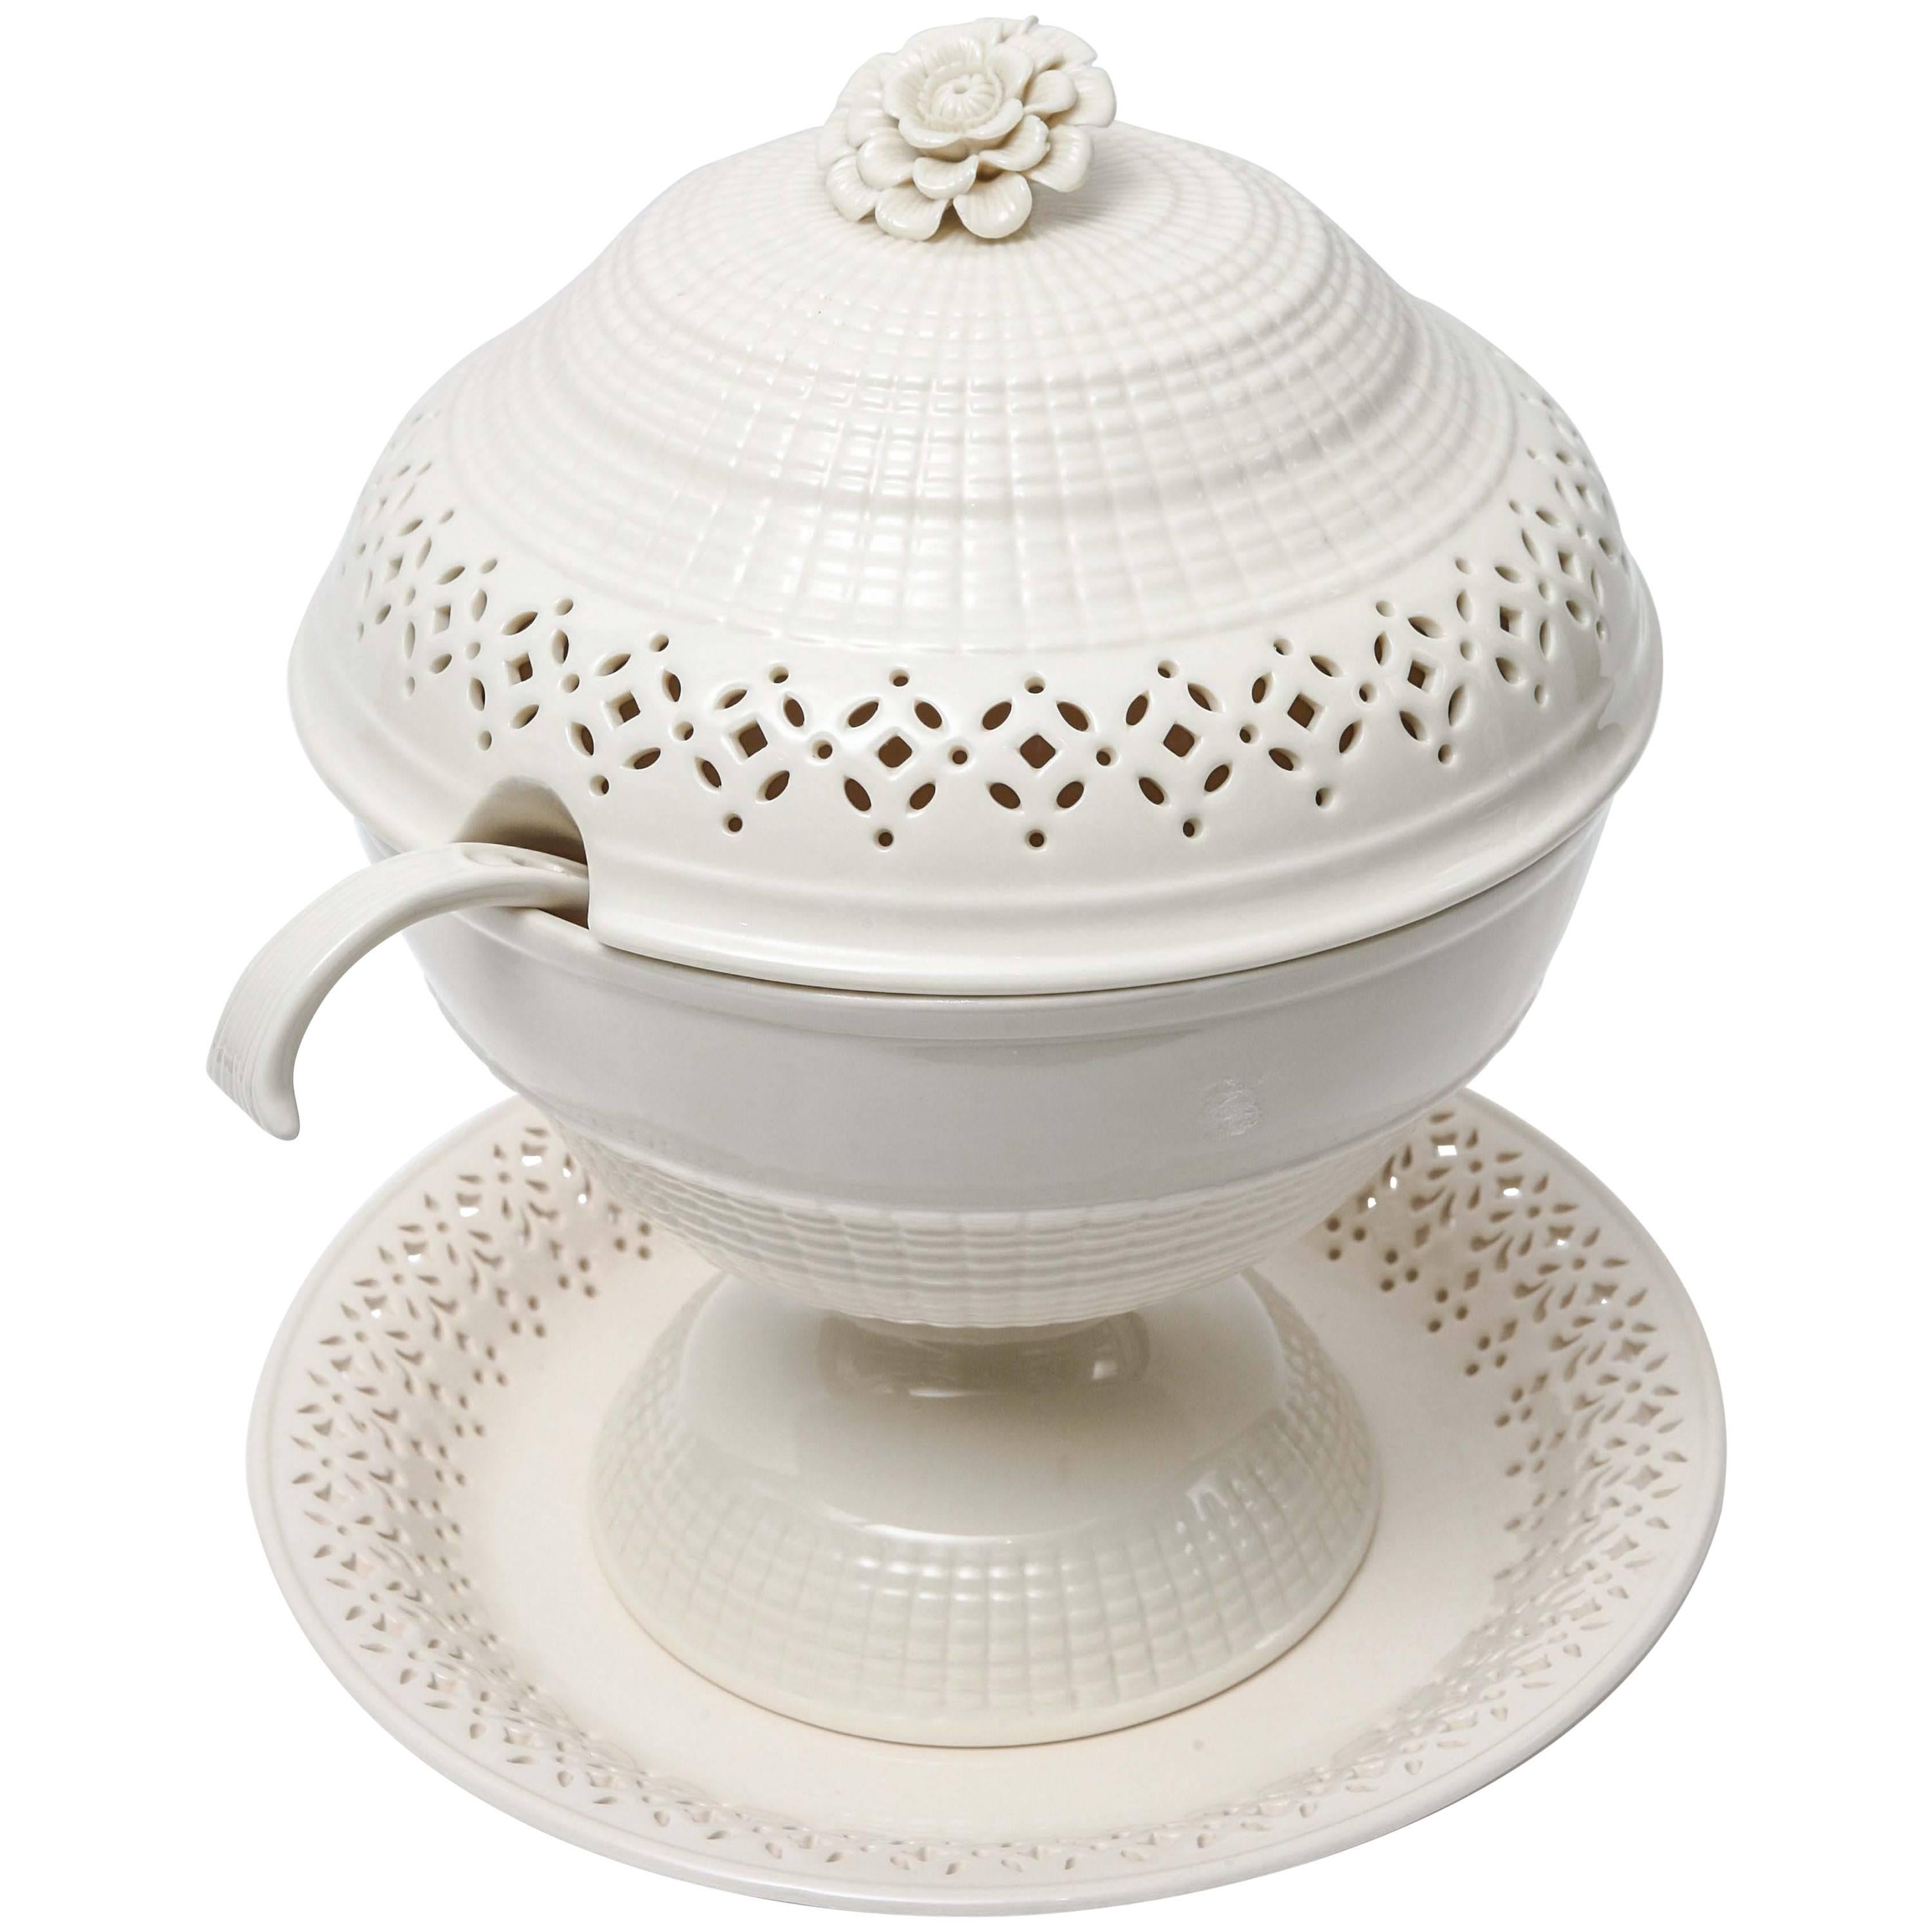 Cream Ware Tureen, Large and Impressive, Flower Finial, Undertray and Ladle